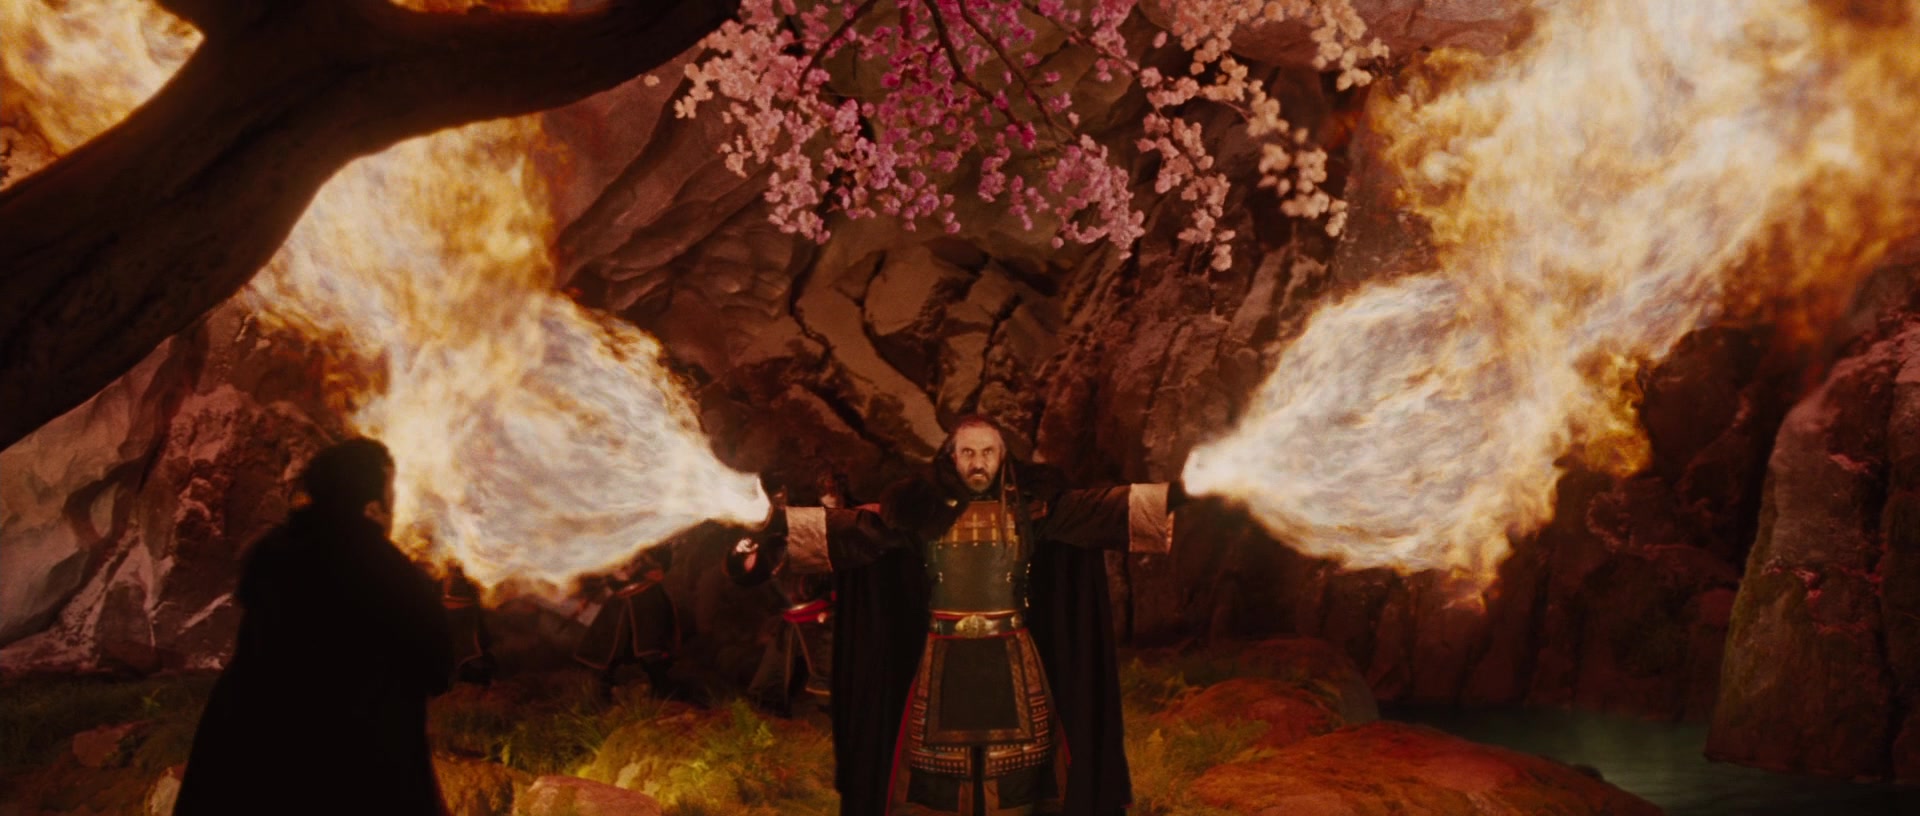 General Iroh (Shaun Toub) unleashes his Fire Bending abilities in The Last Airbender (2010), Paramount Pictures